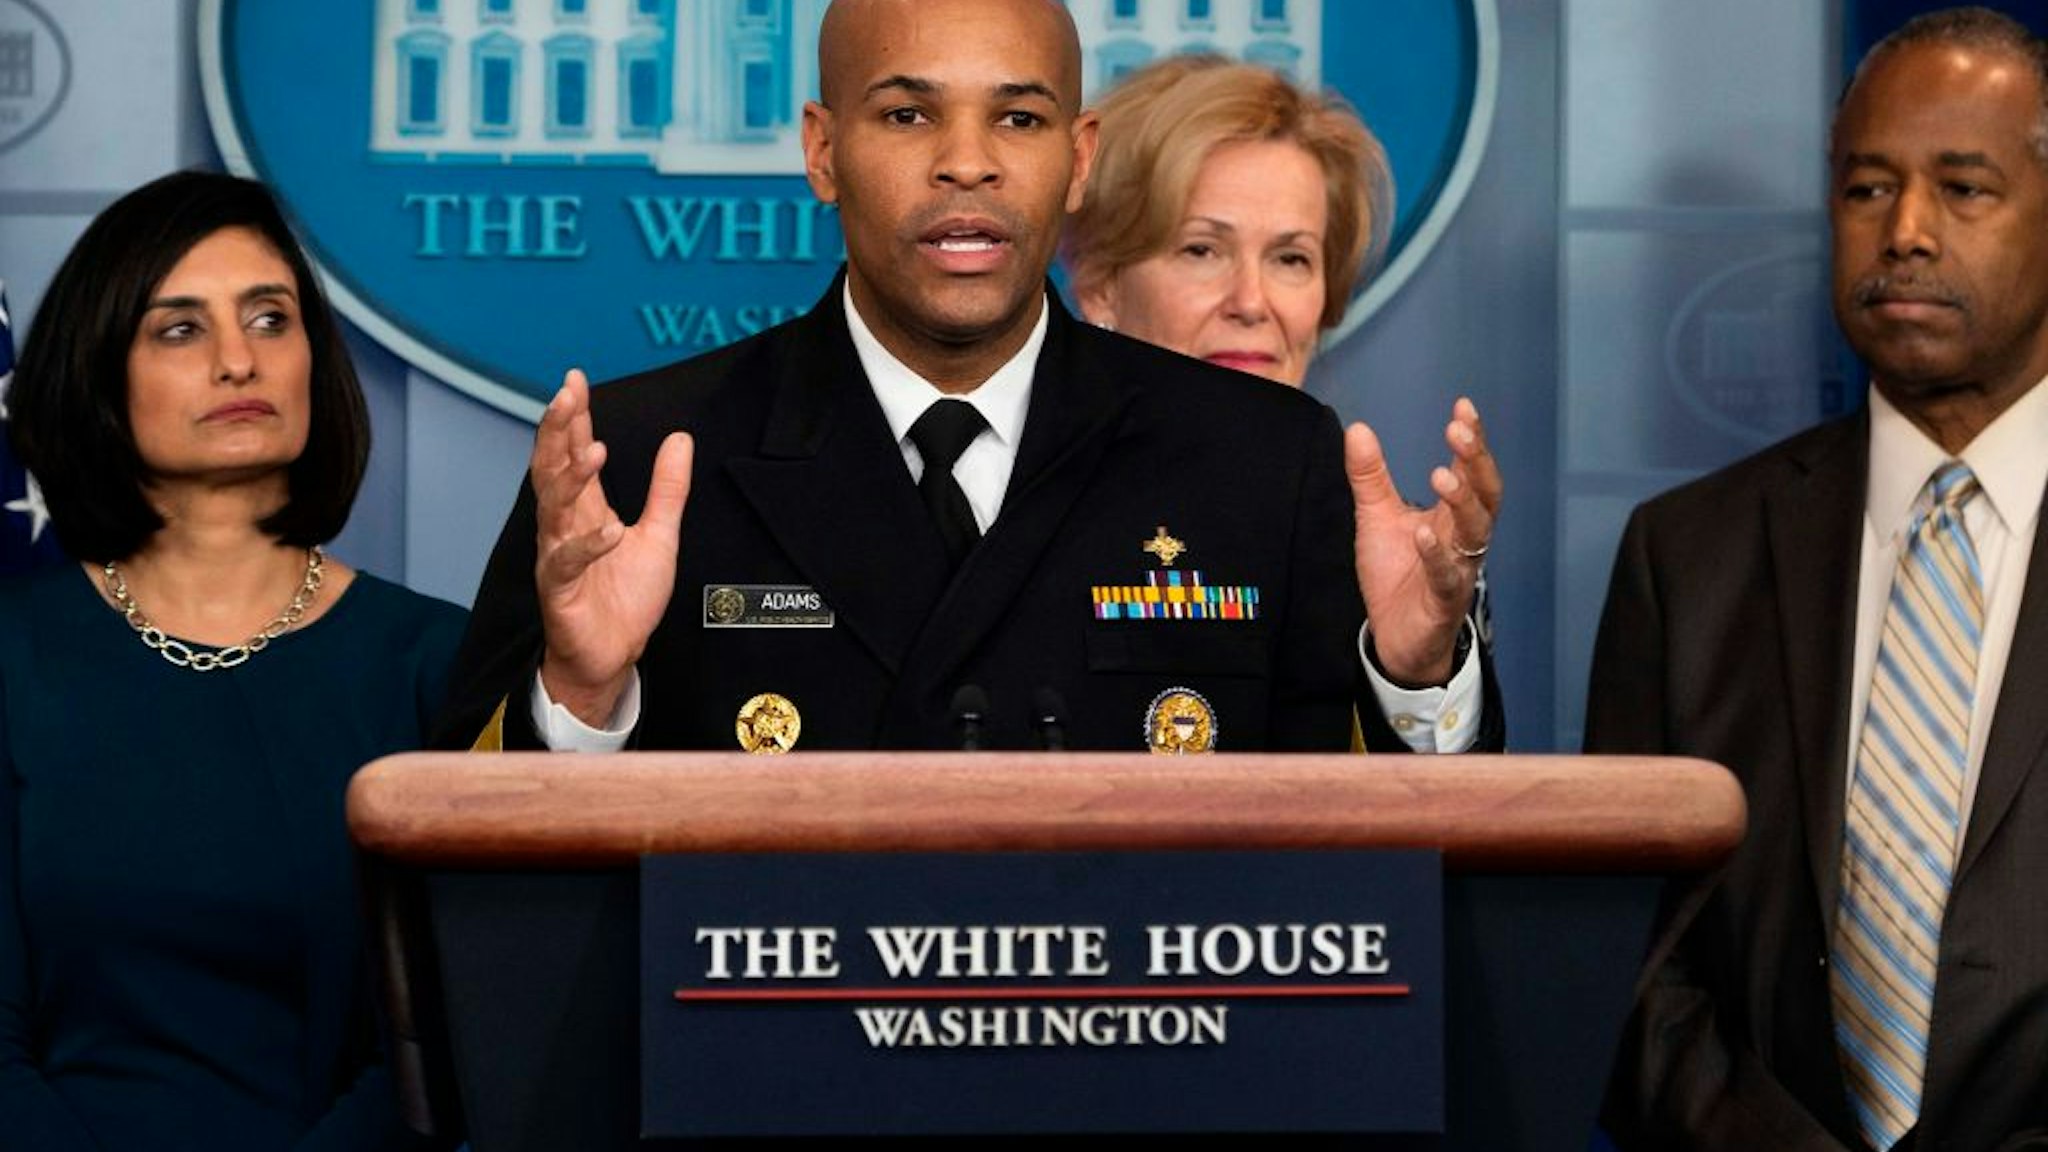 Jerome Adams speaks during a press briefing about the Coronavirus (COVID-19) in the Brady Press Briefing Room at the White House in Washington, DC, March 14, 2020.